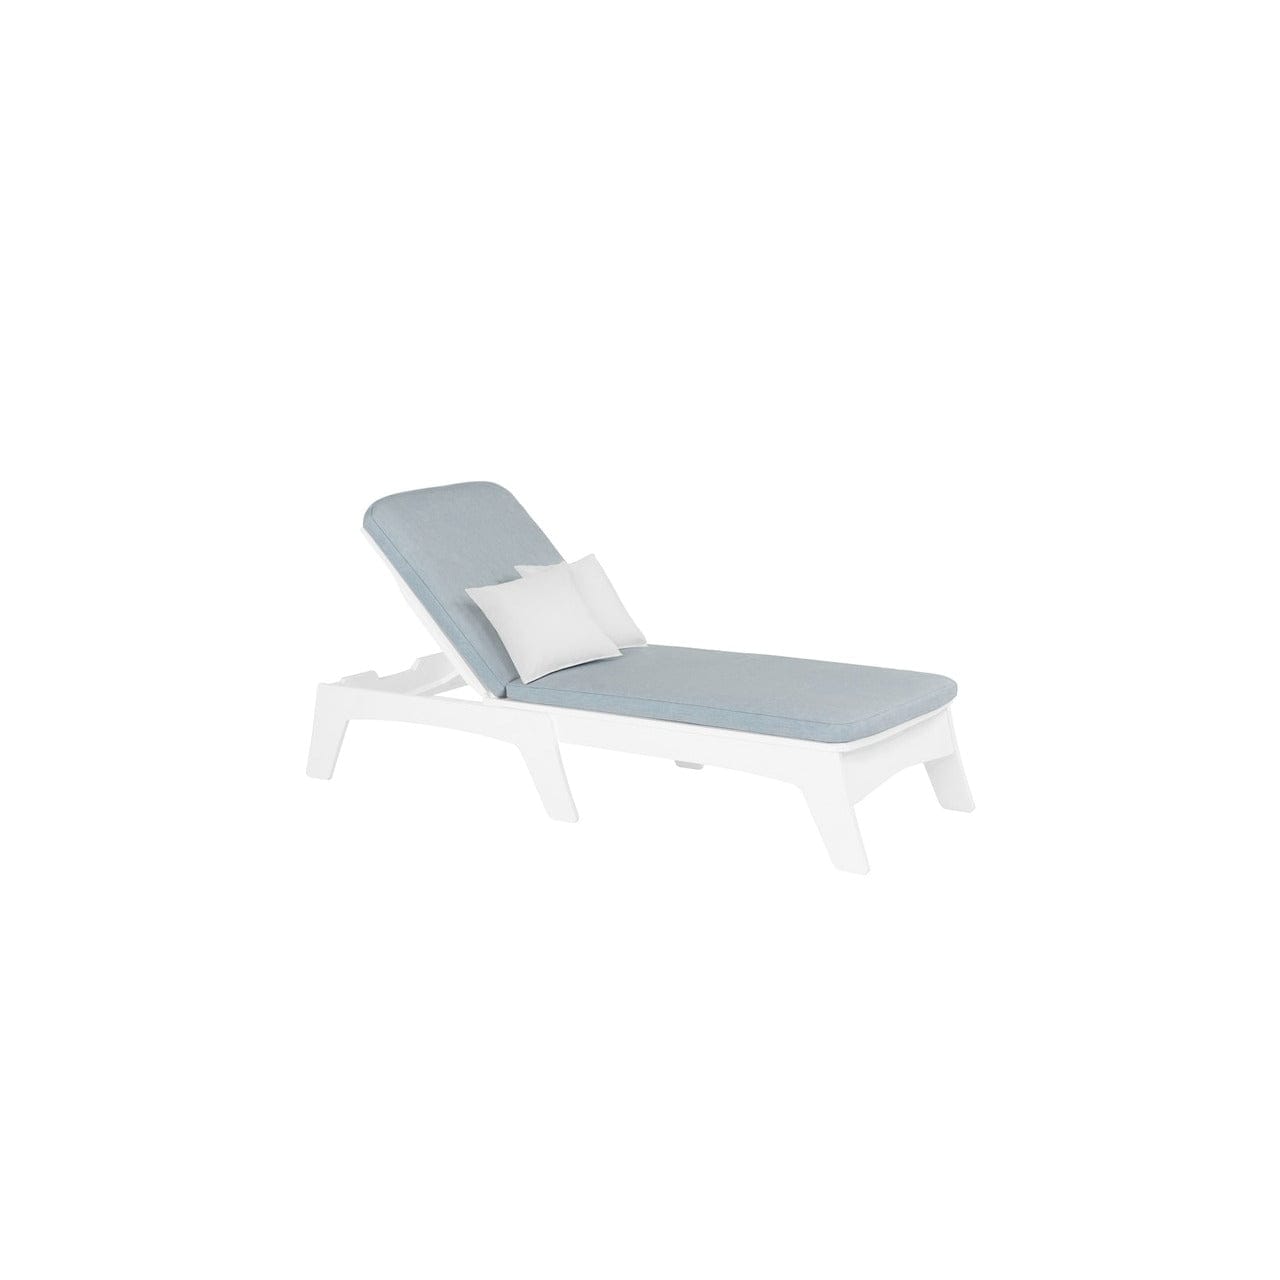 Ledge Lounger Mainstay Chaise Lounge